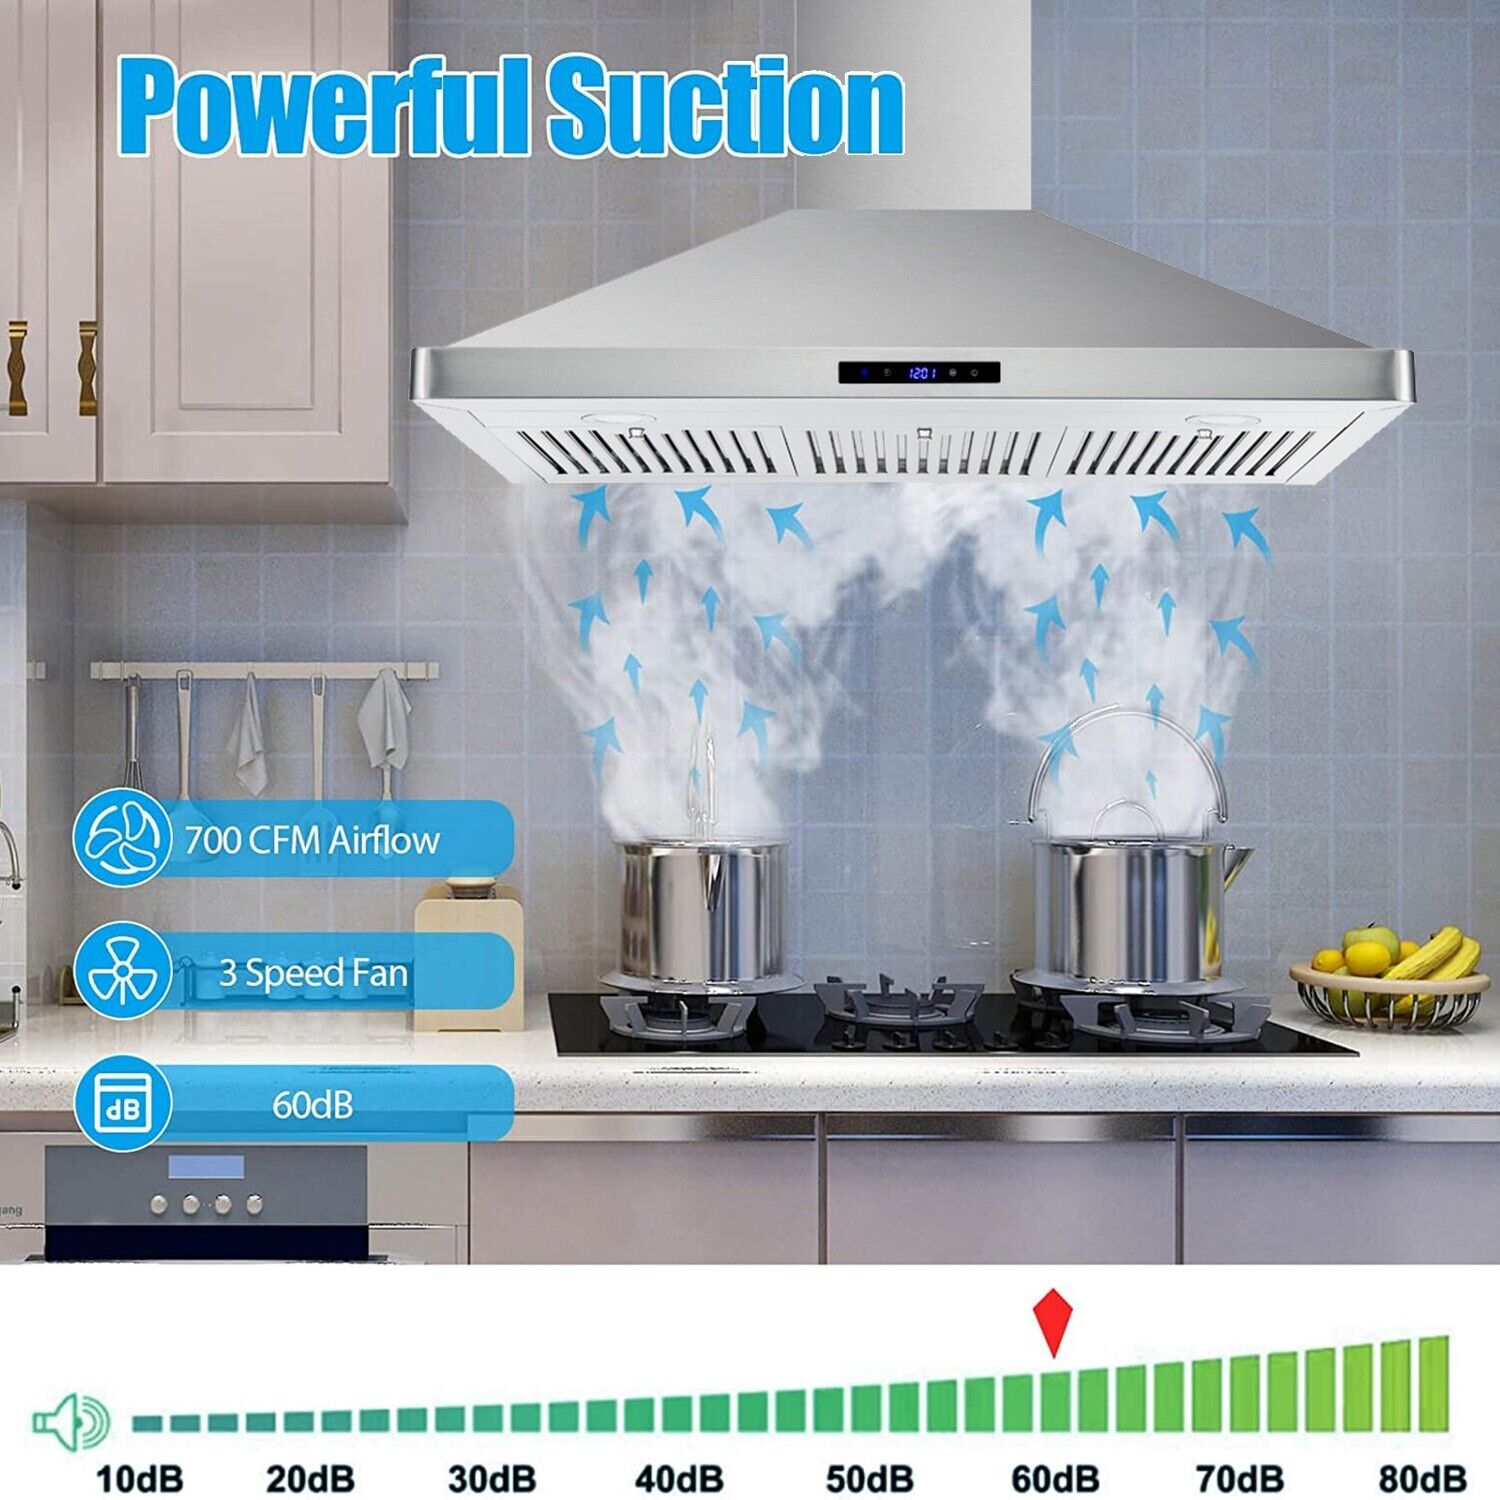 Tieasy 36in Wall Mount Hood Stainless Steel Kitchen Stove Vent 700CFM 3-Speed Fan - 1090 Range Hood USGD1090(Ducted)